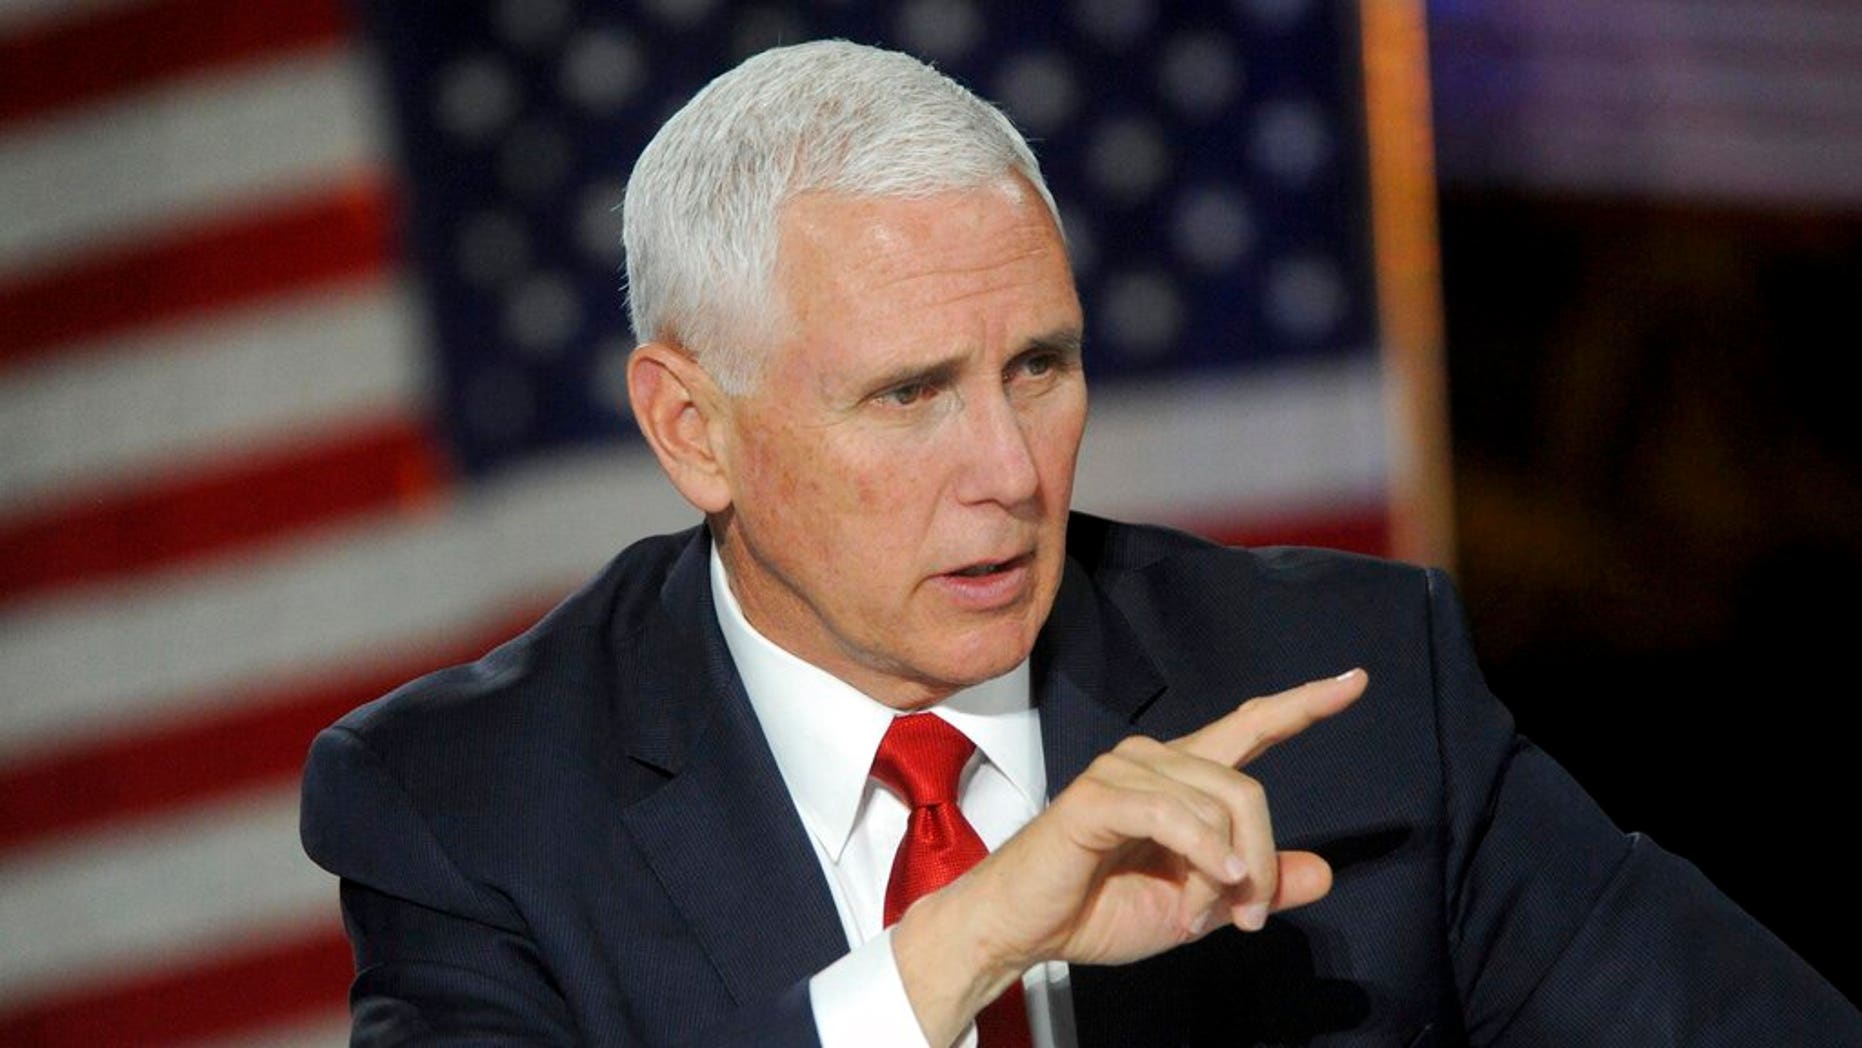 Vice President Mike Pence at the fifth National Space Council meeting calling for landing astronauts on the moon within five years. (Associated Press)